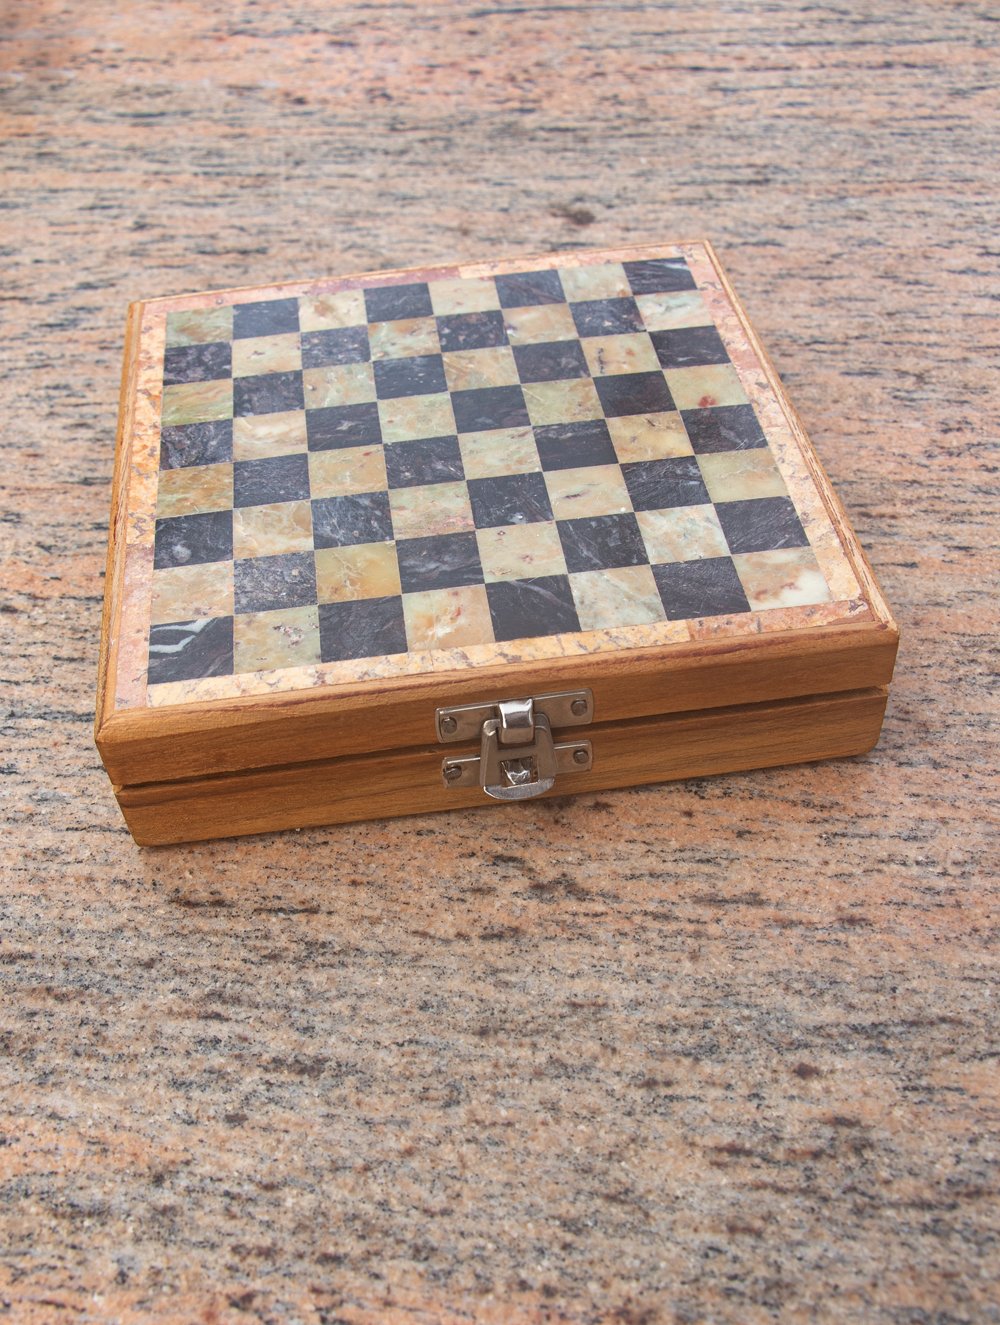 Load image into Gallery viewer, Marble Chess with Board